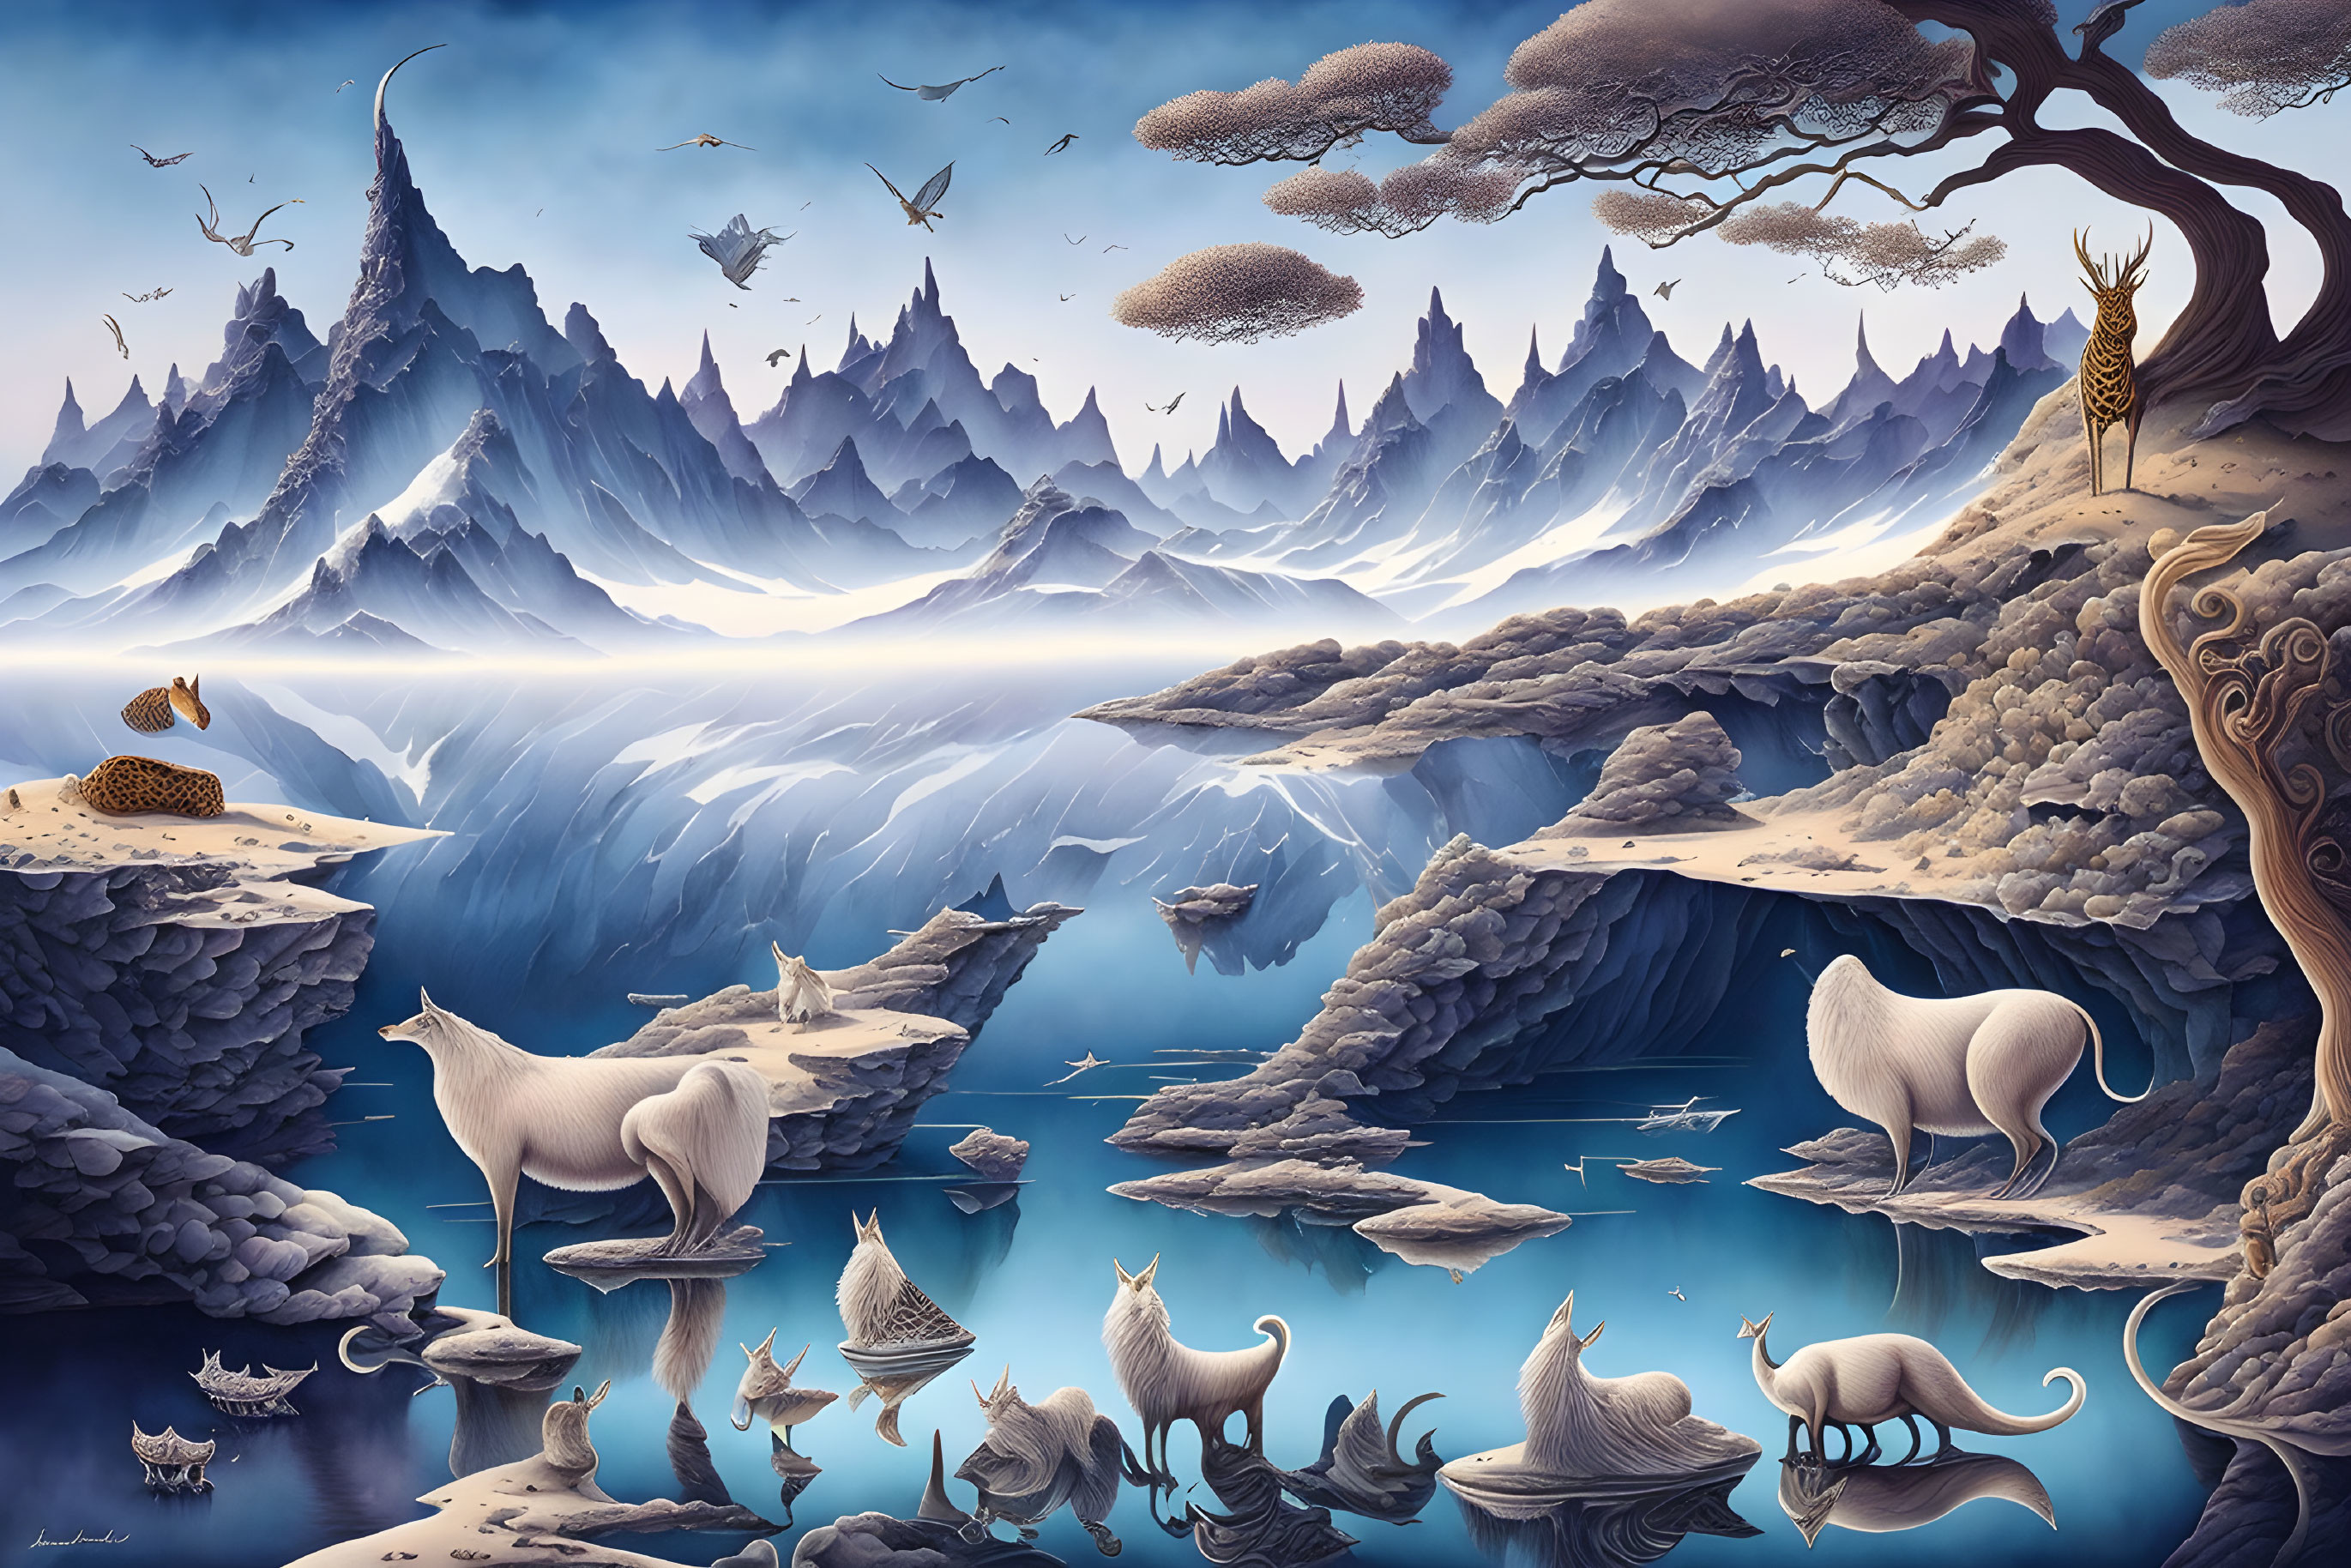 Unusual Animals in a surreal landscape